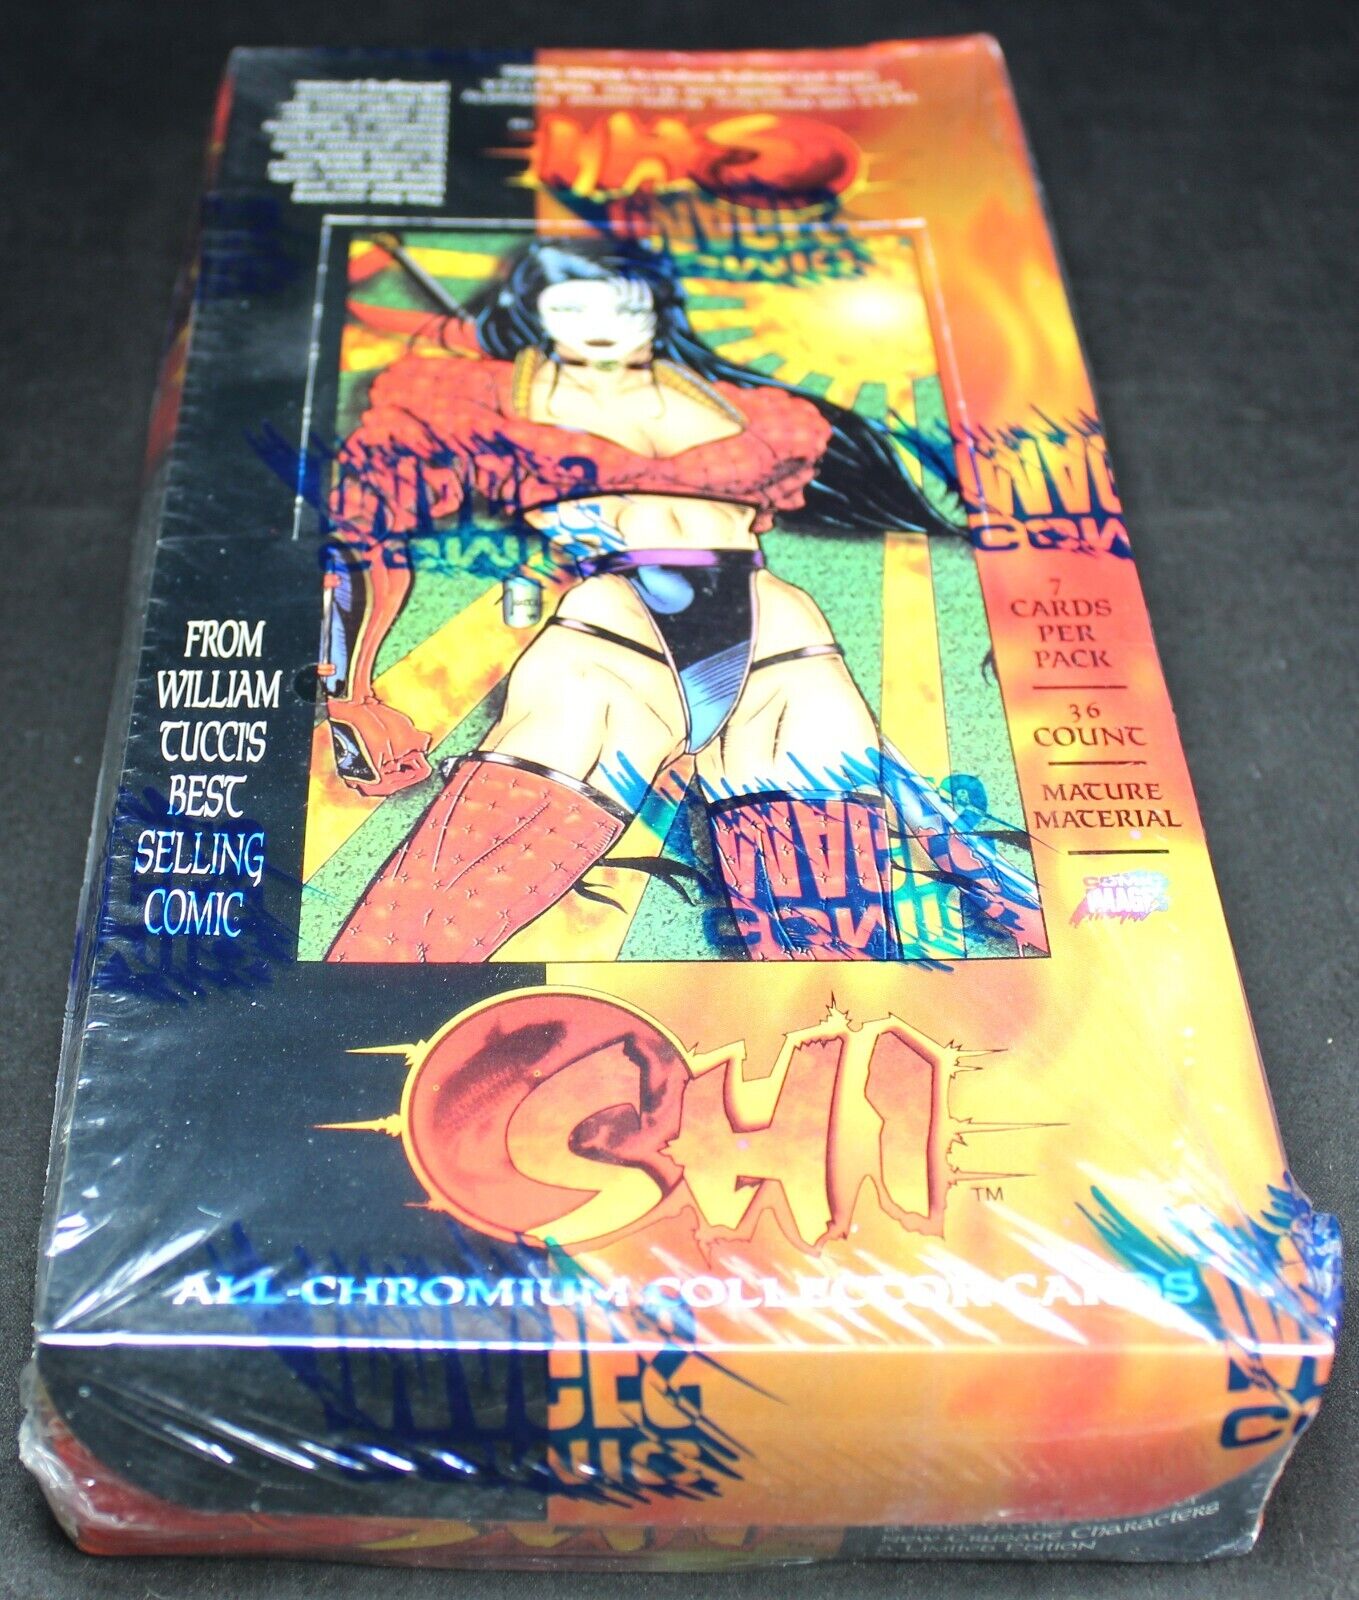 1995 Shi All-Chromium Trading Card Box by Comic Images - SEALED